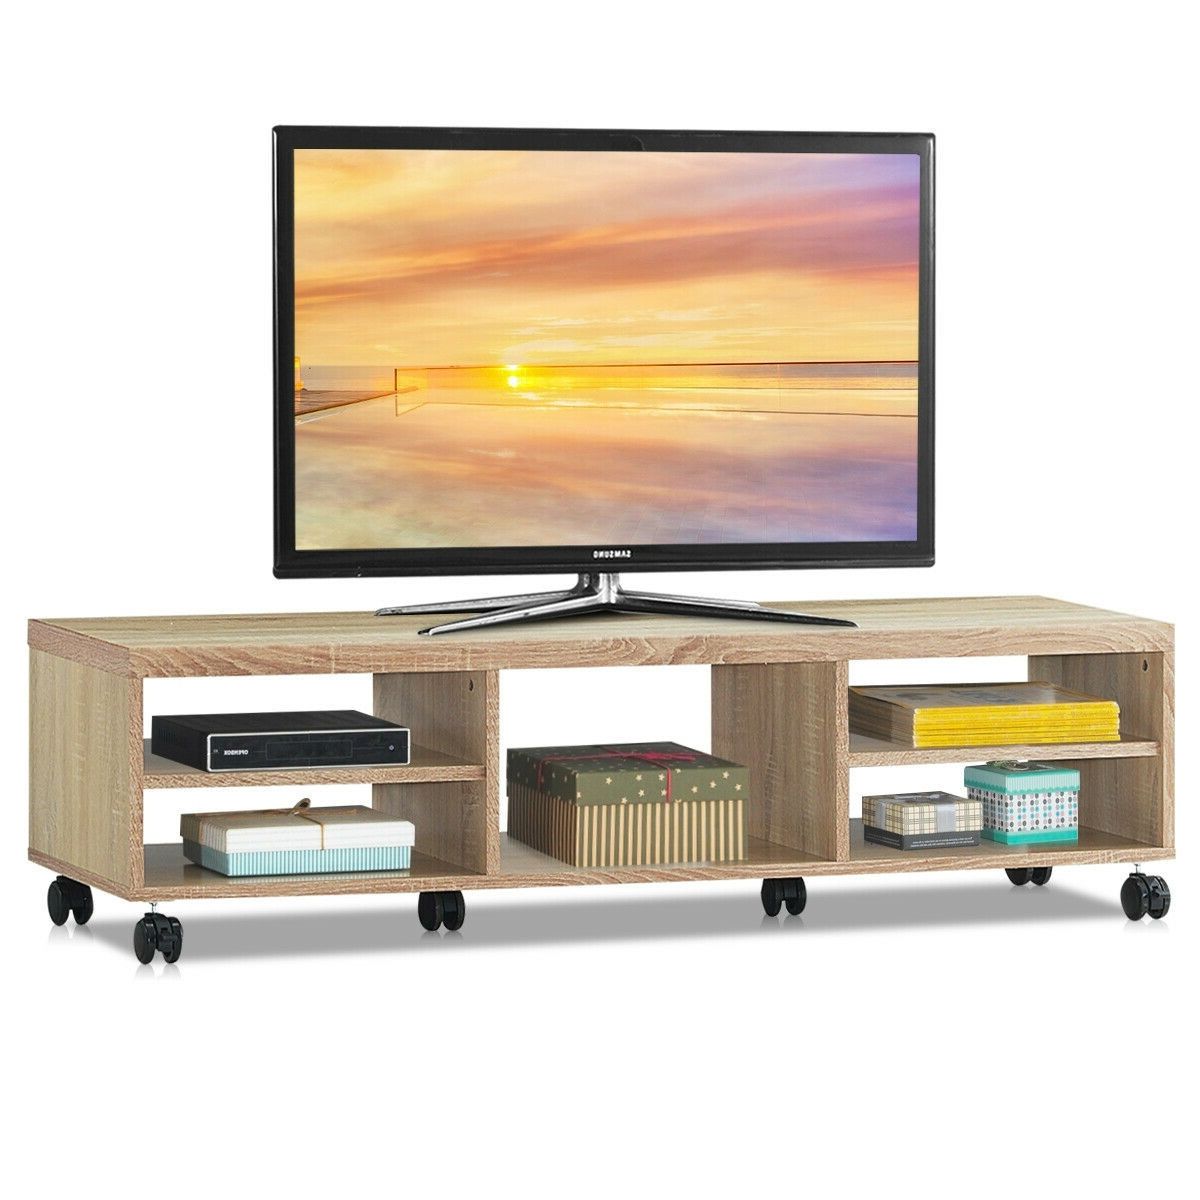 Rolling 60 Inch Tv Stand In Natural Wood Finish With 6 Wheel Inside Modern Rolling Tv Stands (Gallery 20 of 20)